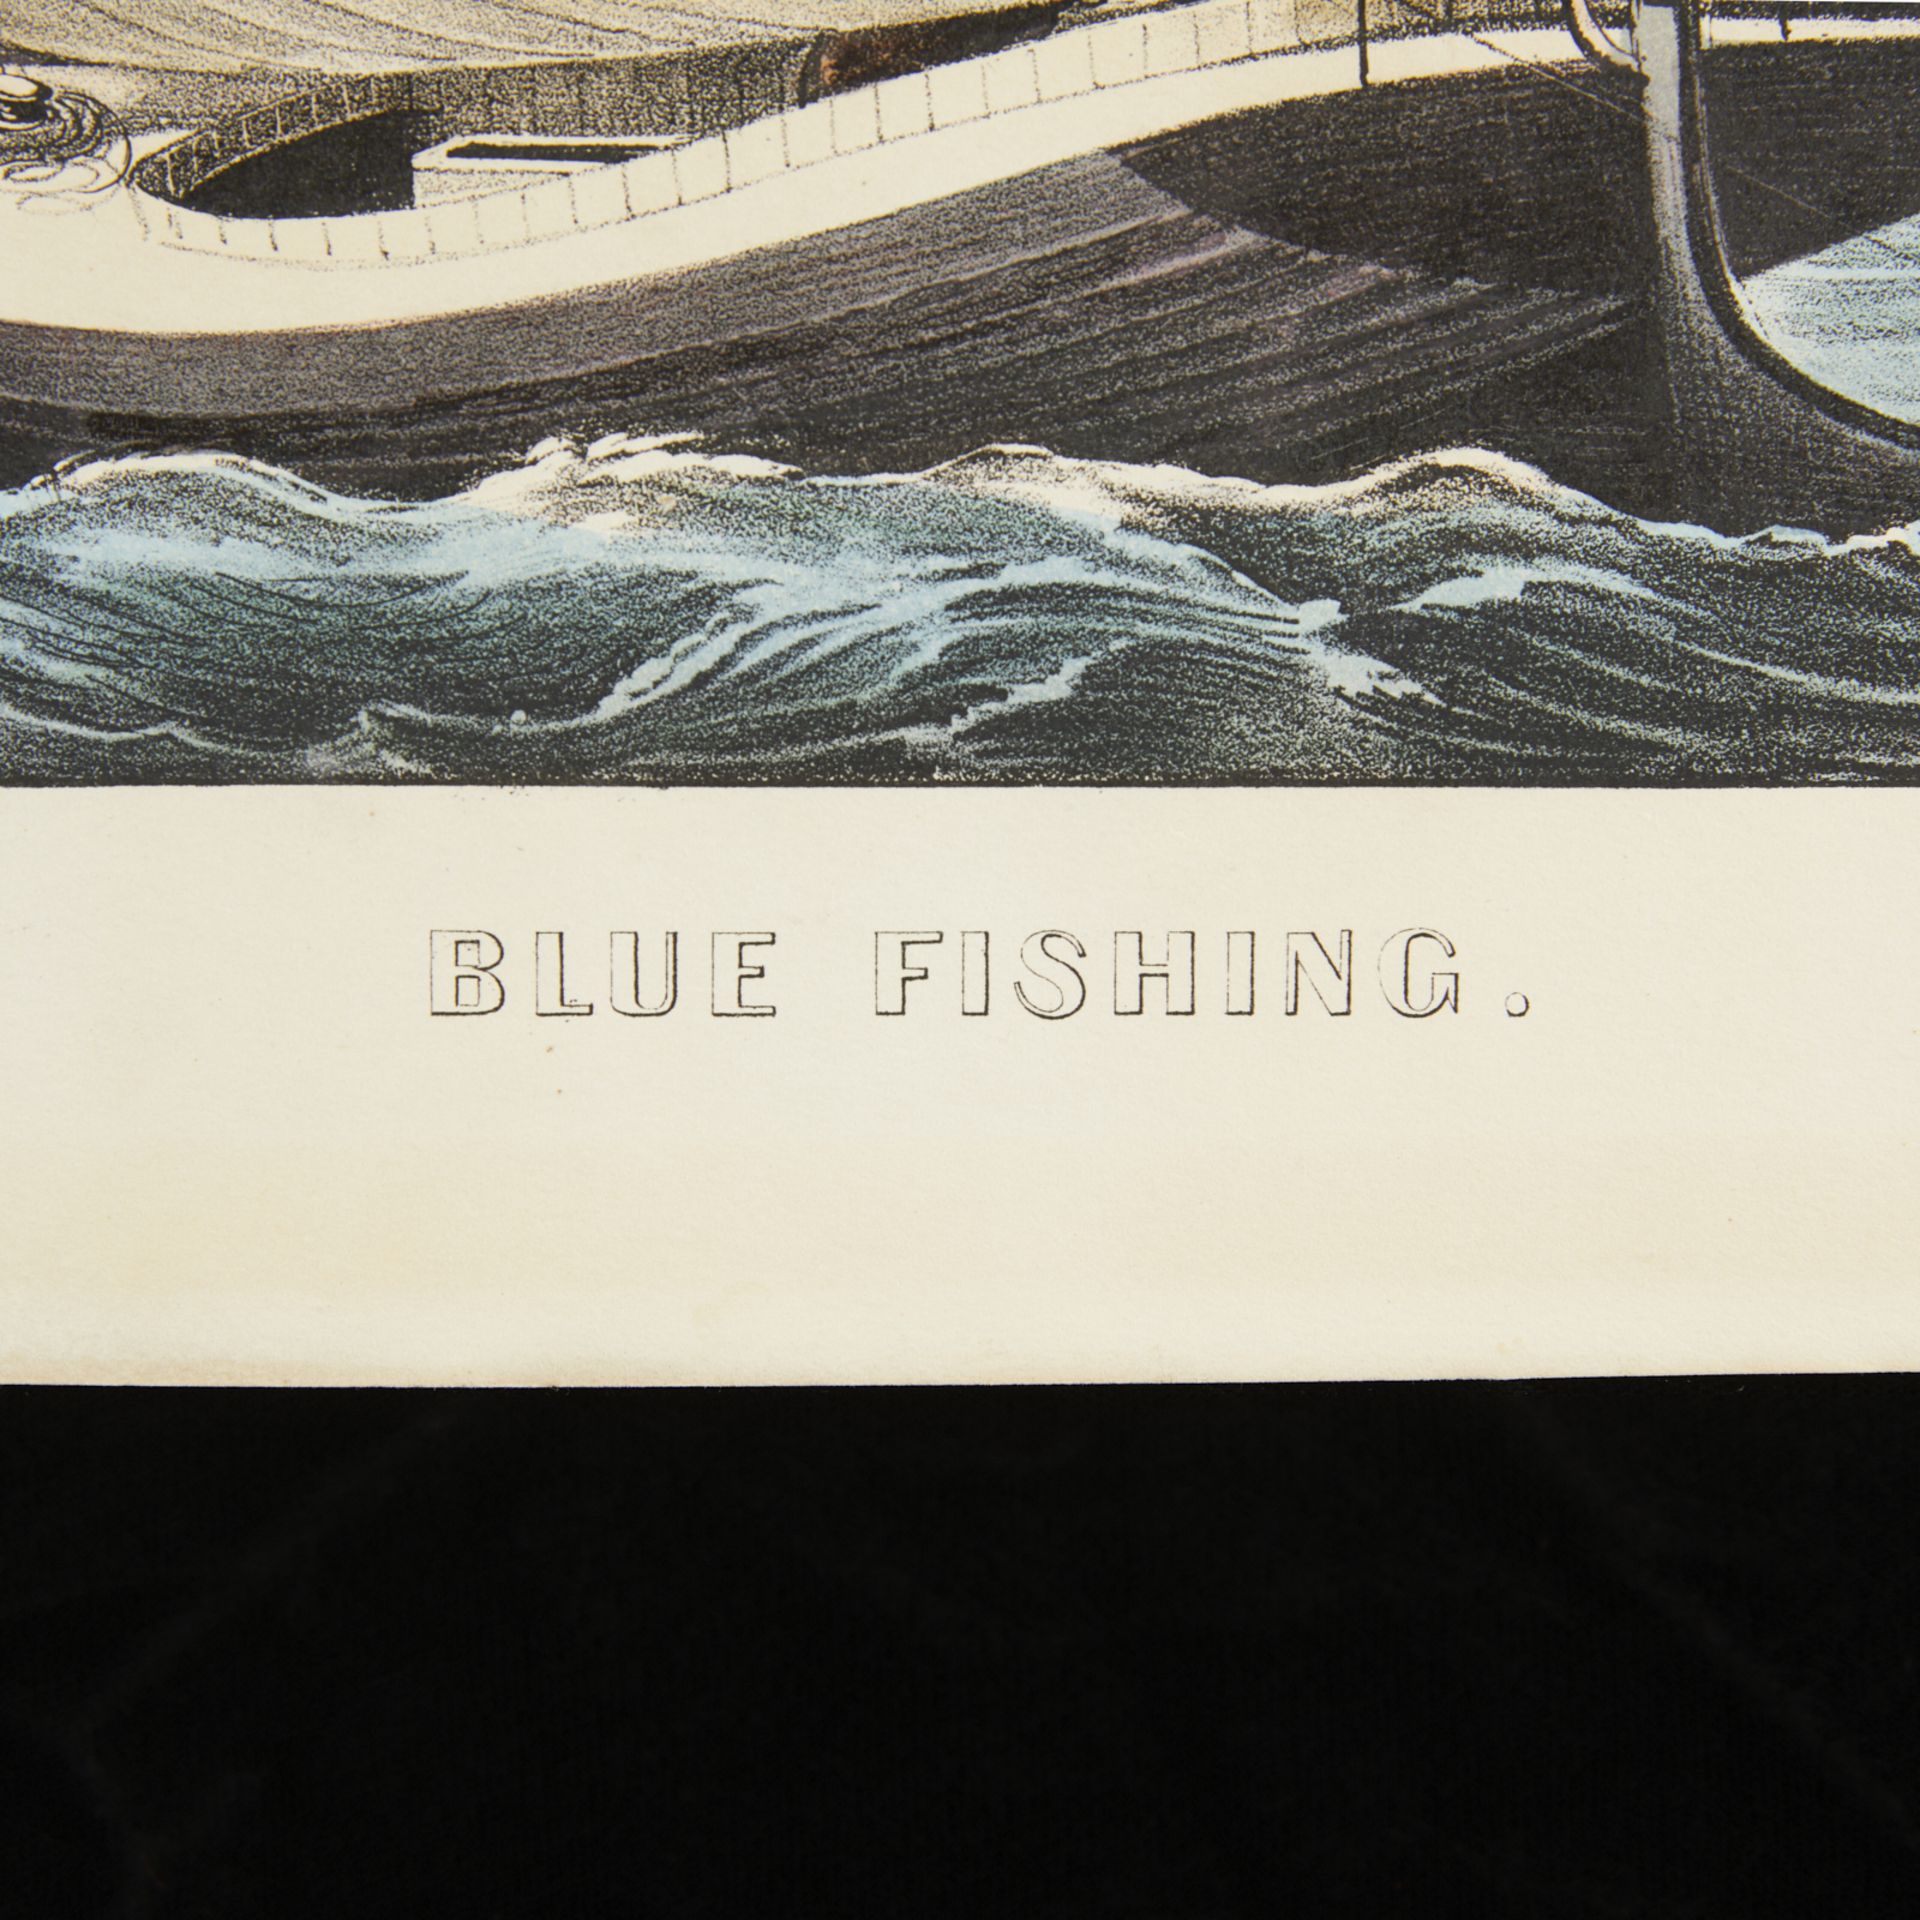 Currier & Ives "Blue Fishing" Print - Image 2 of 8